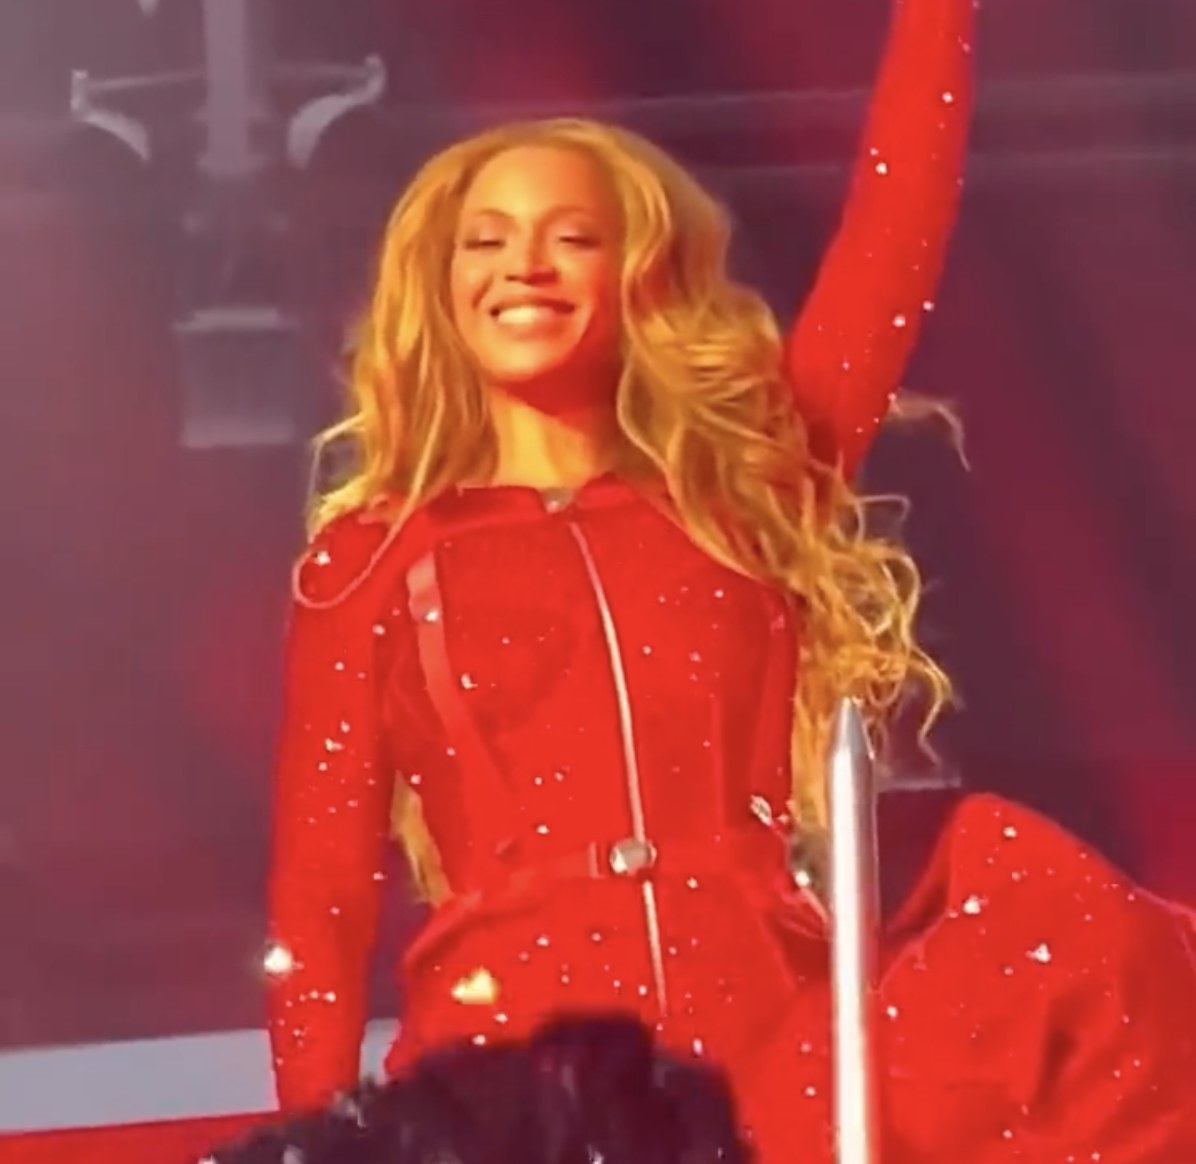 A closeup of Beyonce smiling proudly